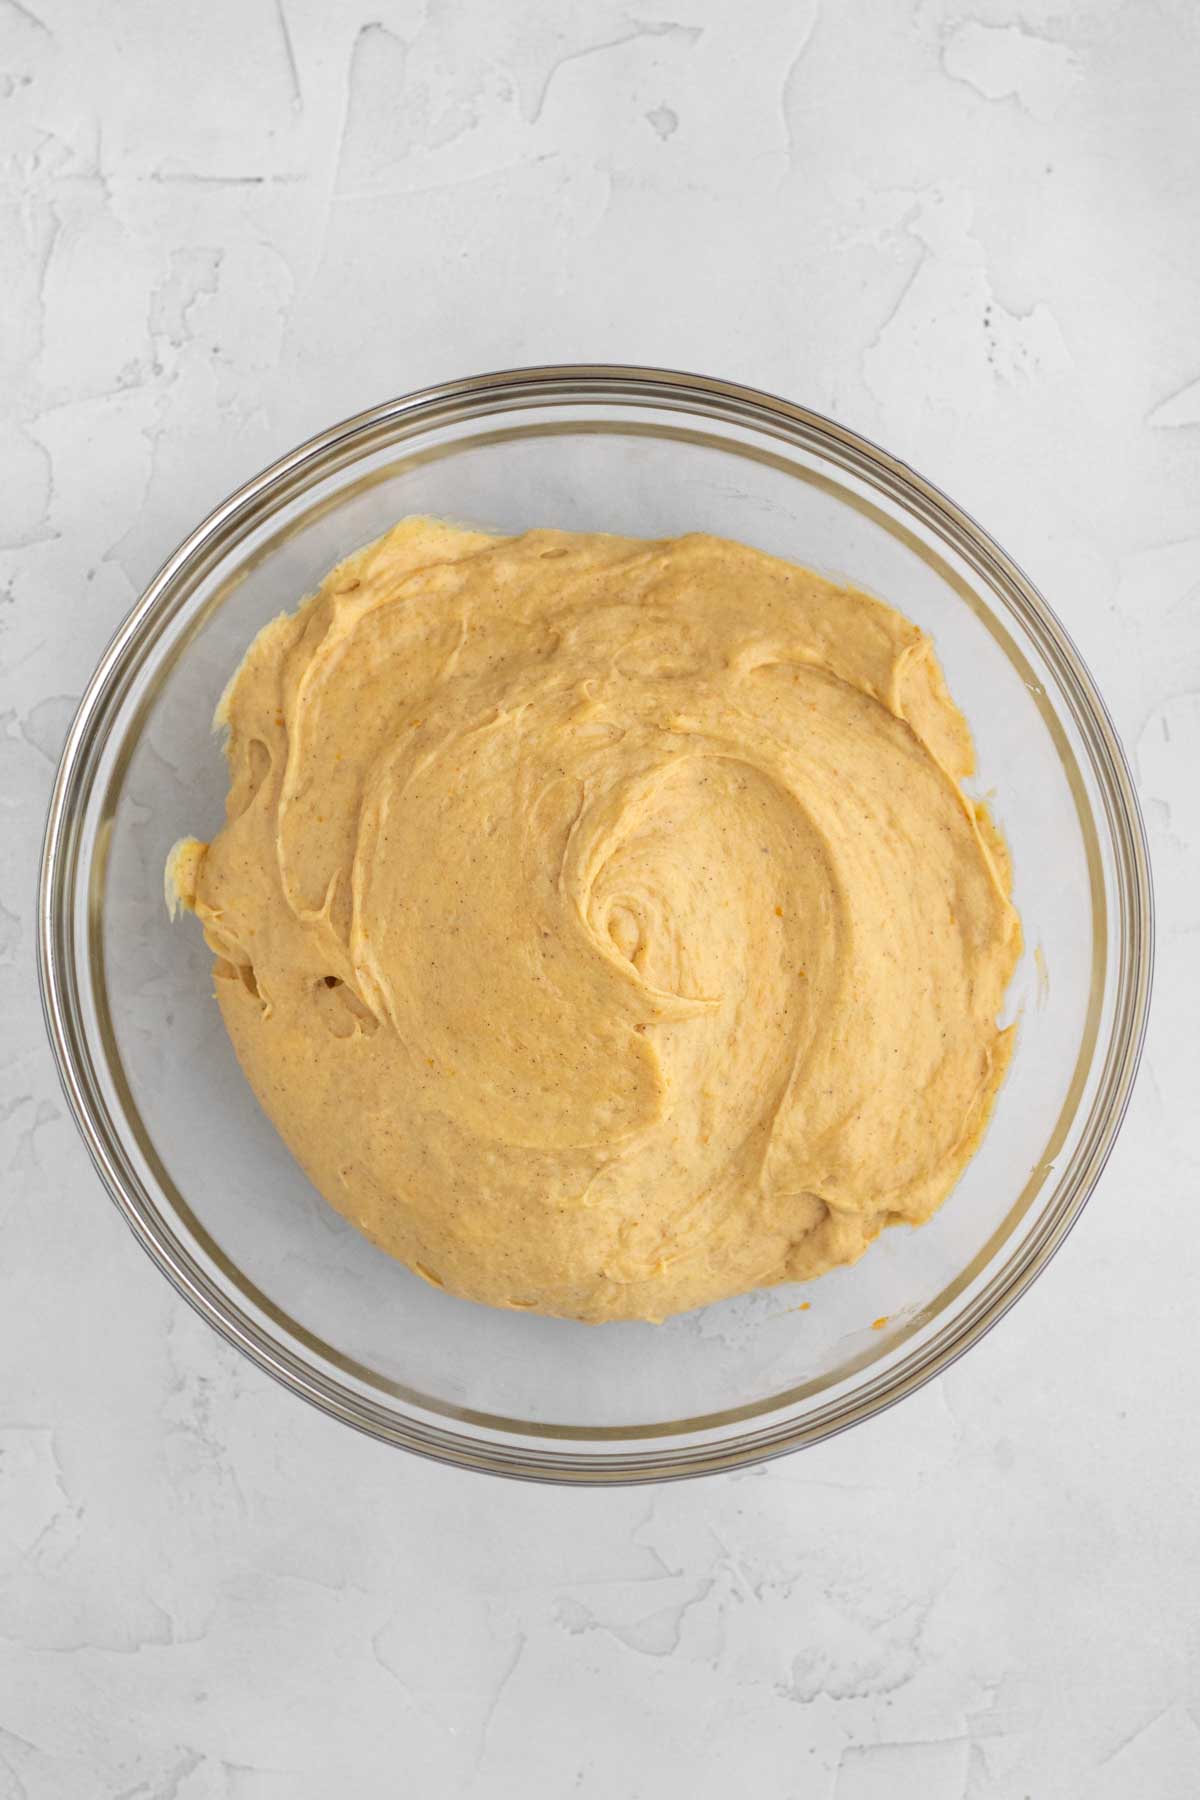 Adding milk and mixing into a smooth pumpkin cupcake batter.